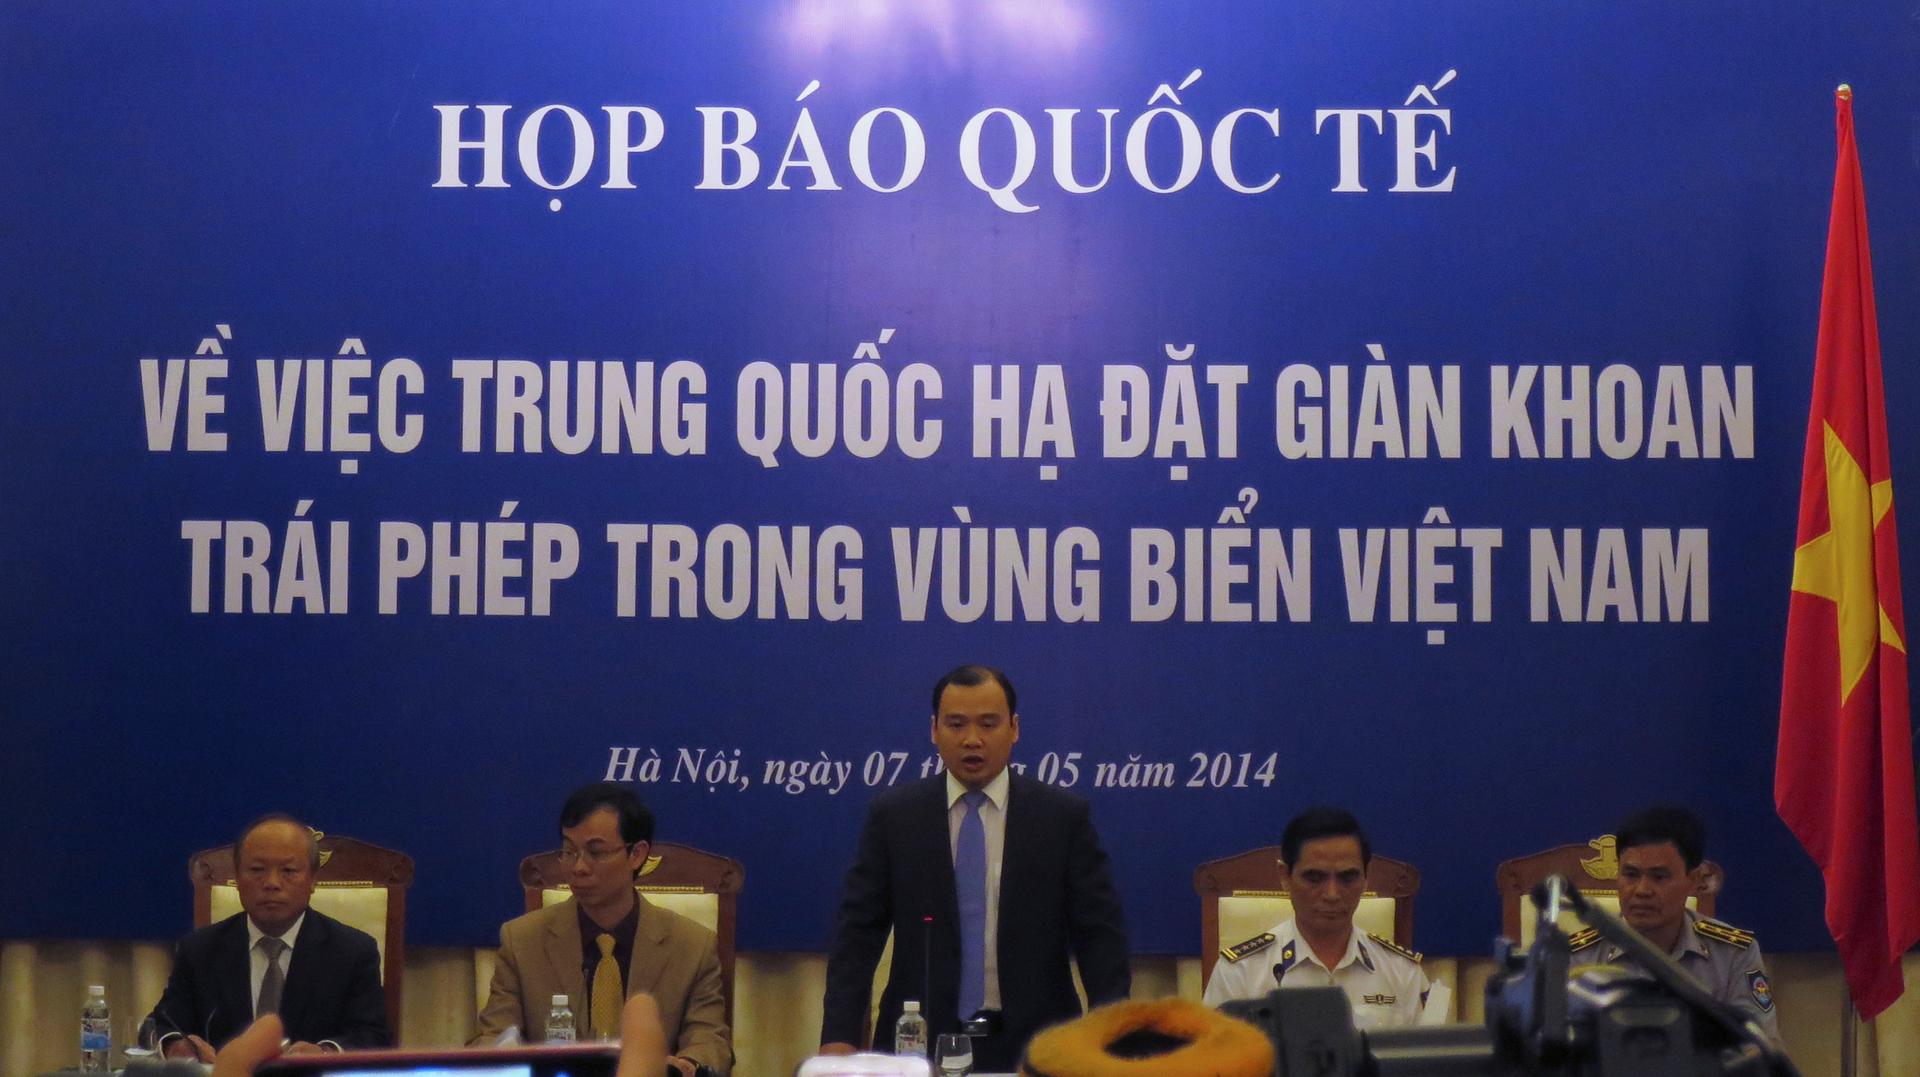 Vietnam government spokesman Le Hai Binh (C) speaks at a news conference on the deployment of a Chinese oil rig in a part of the disputed South China Sea, in Hanoi May 7, 2014.